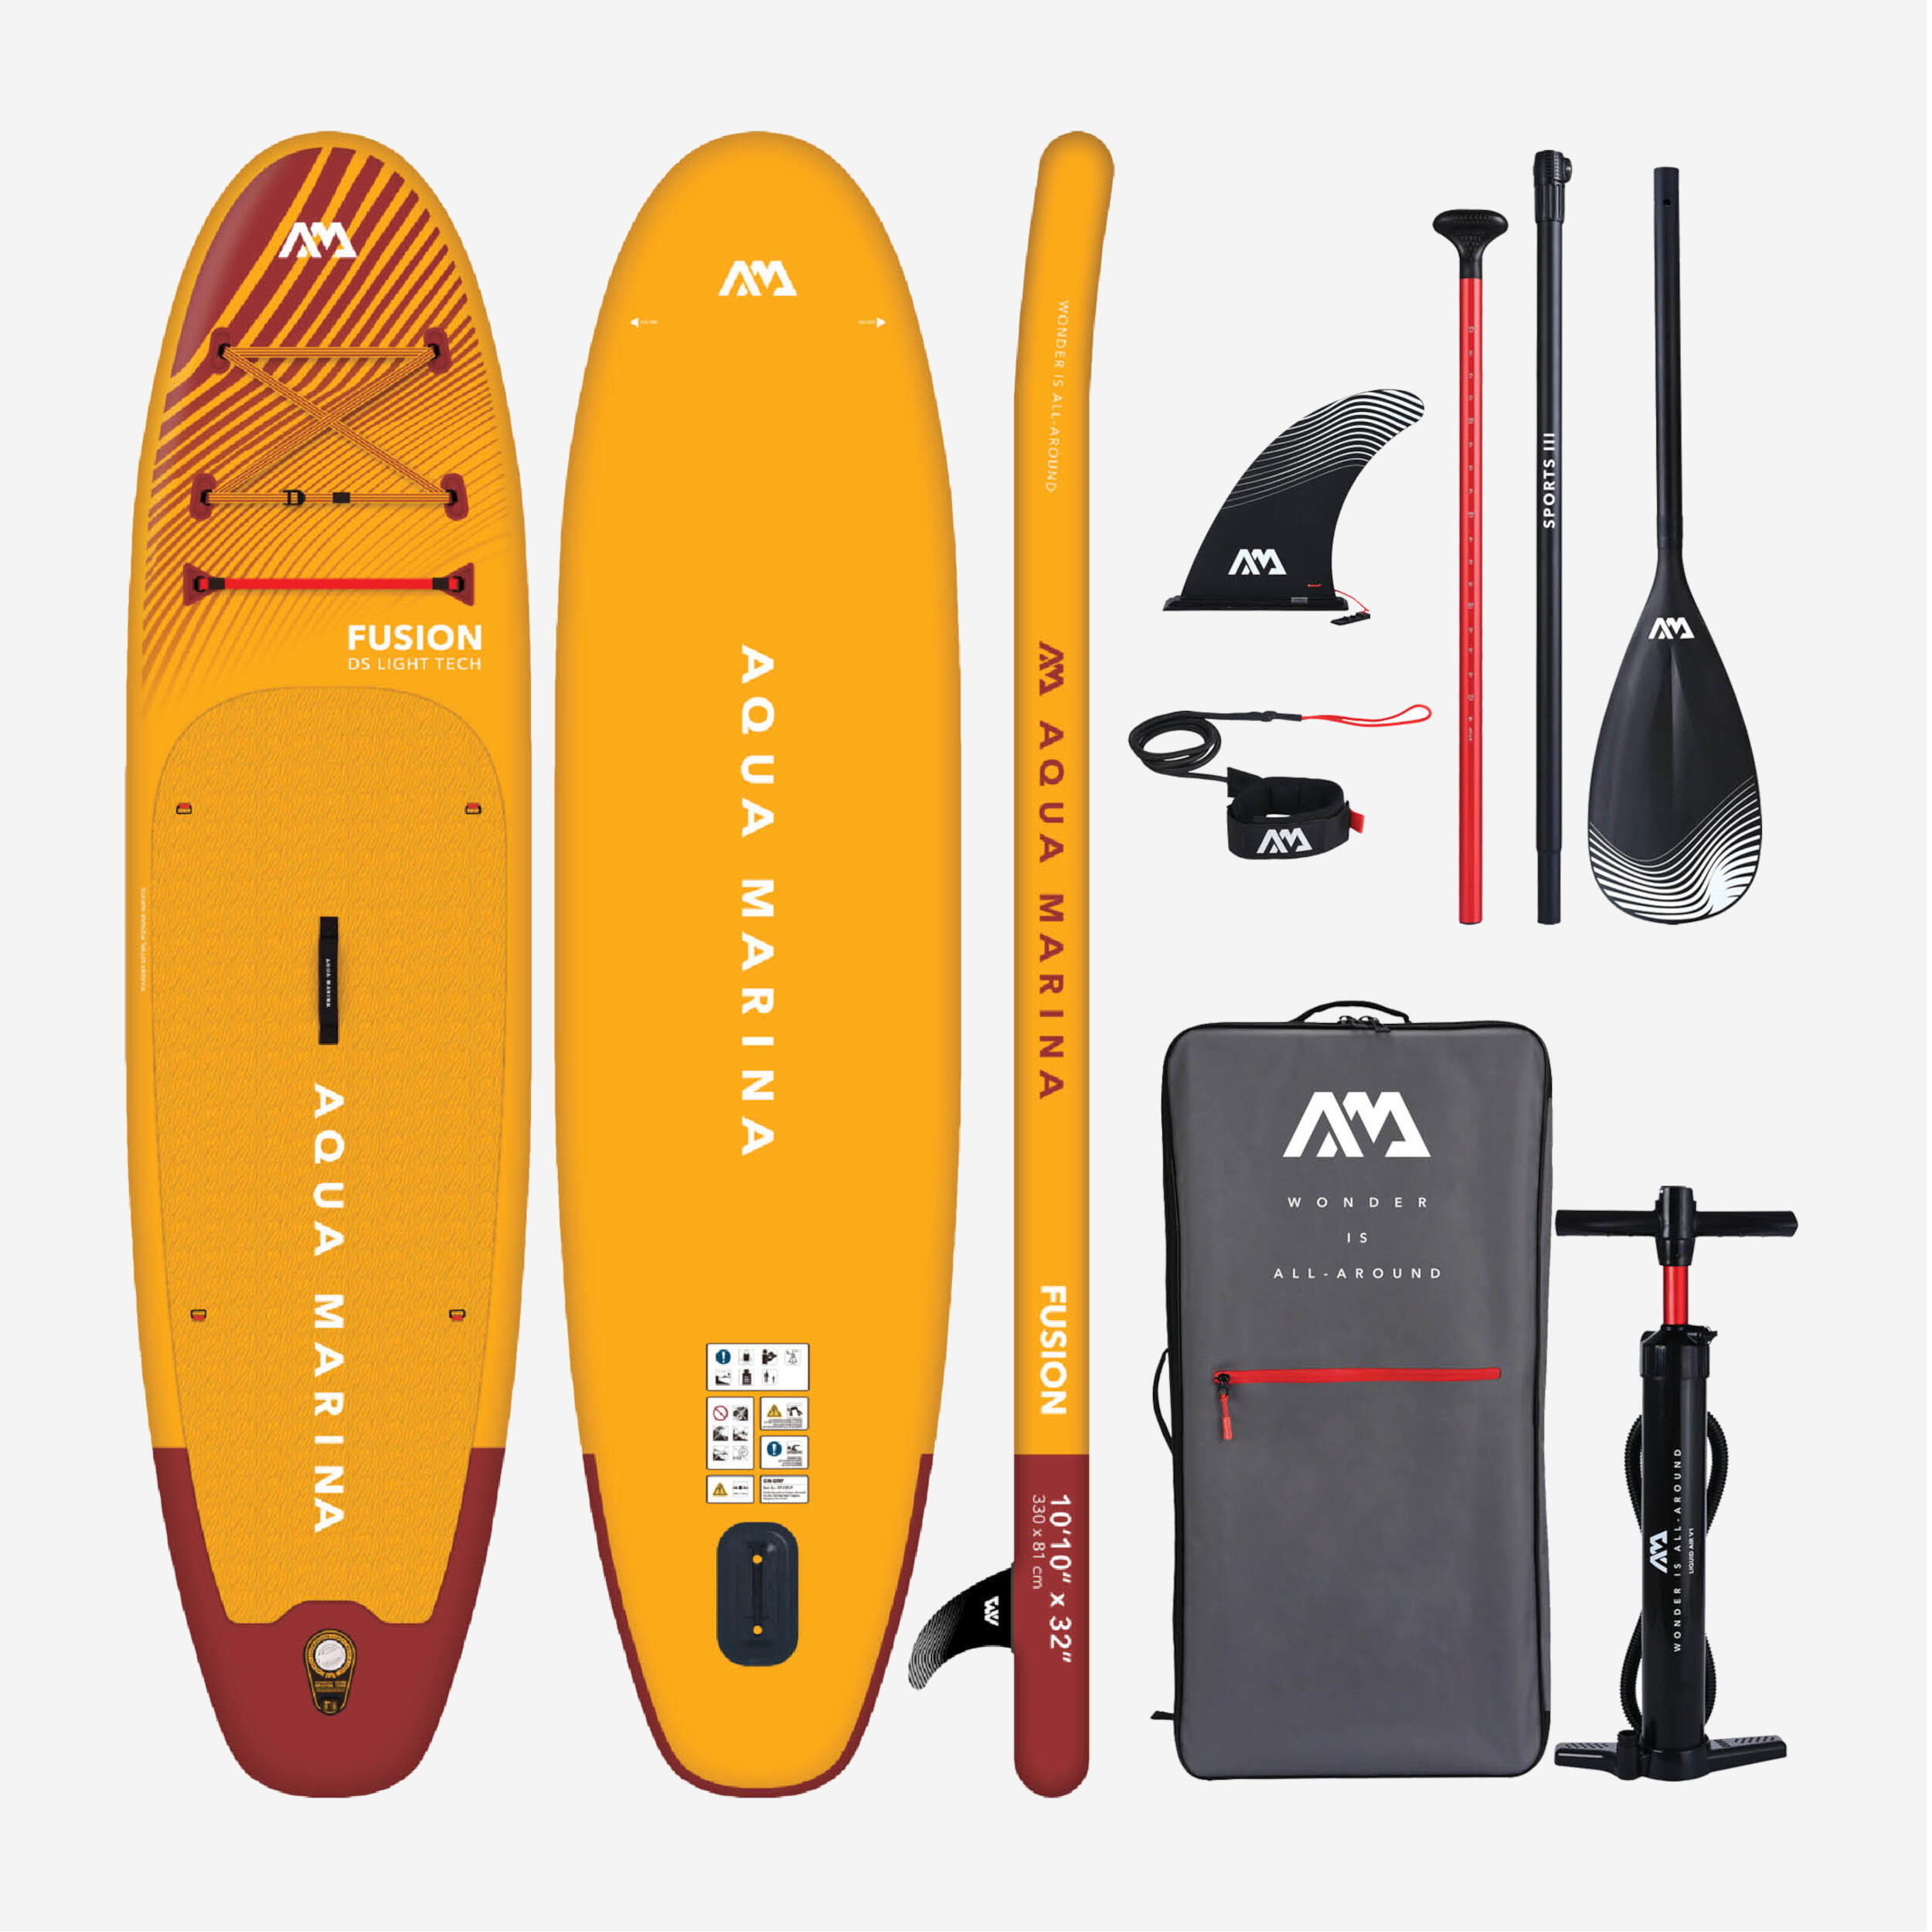 Aqua Marina Fusion stand-up paddle board package 10ft10/330cm 1/15